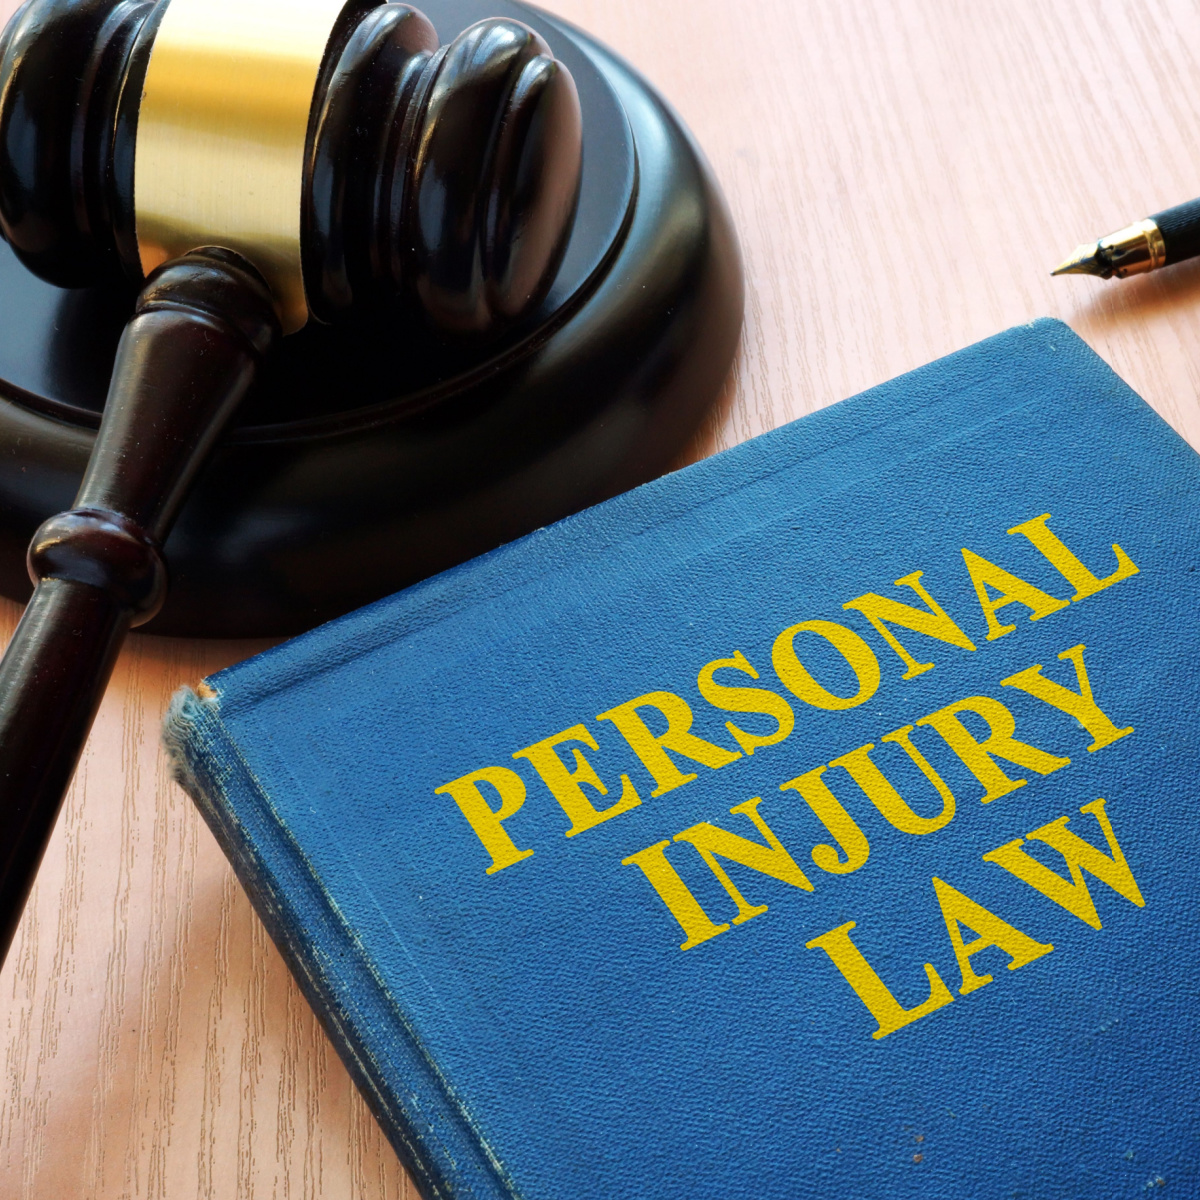 Houston personal injury law handbook on judge’s table with a gavel and pen.